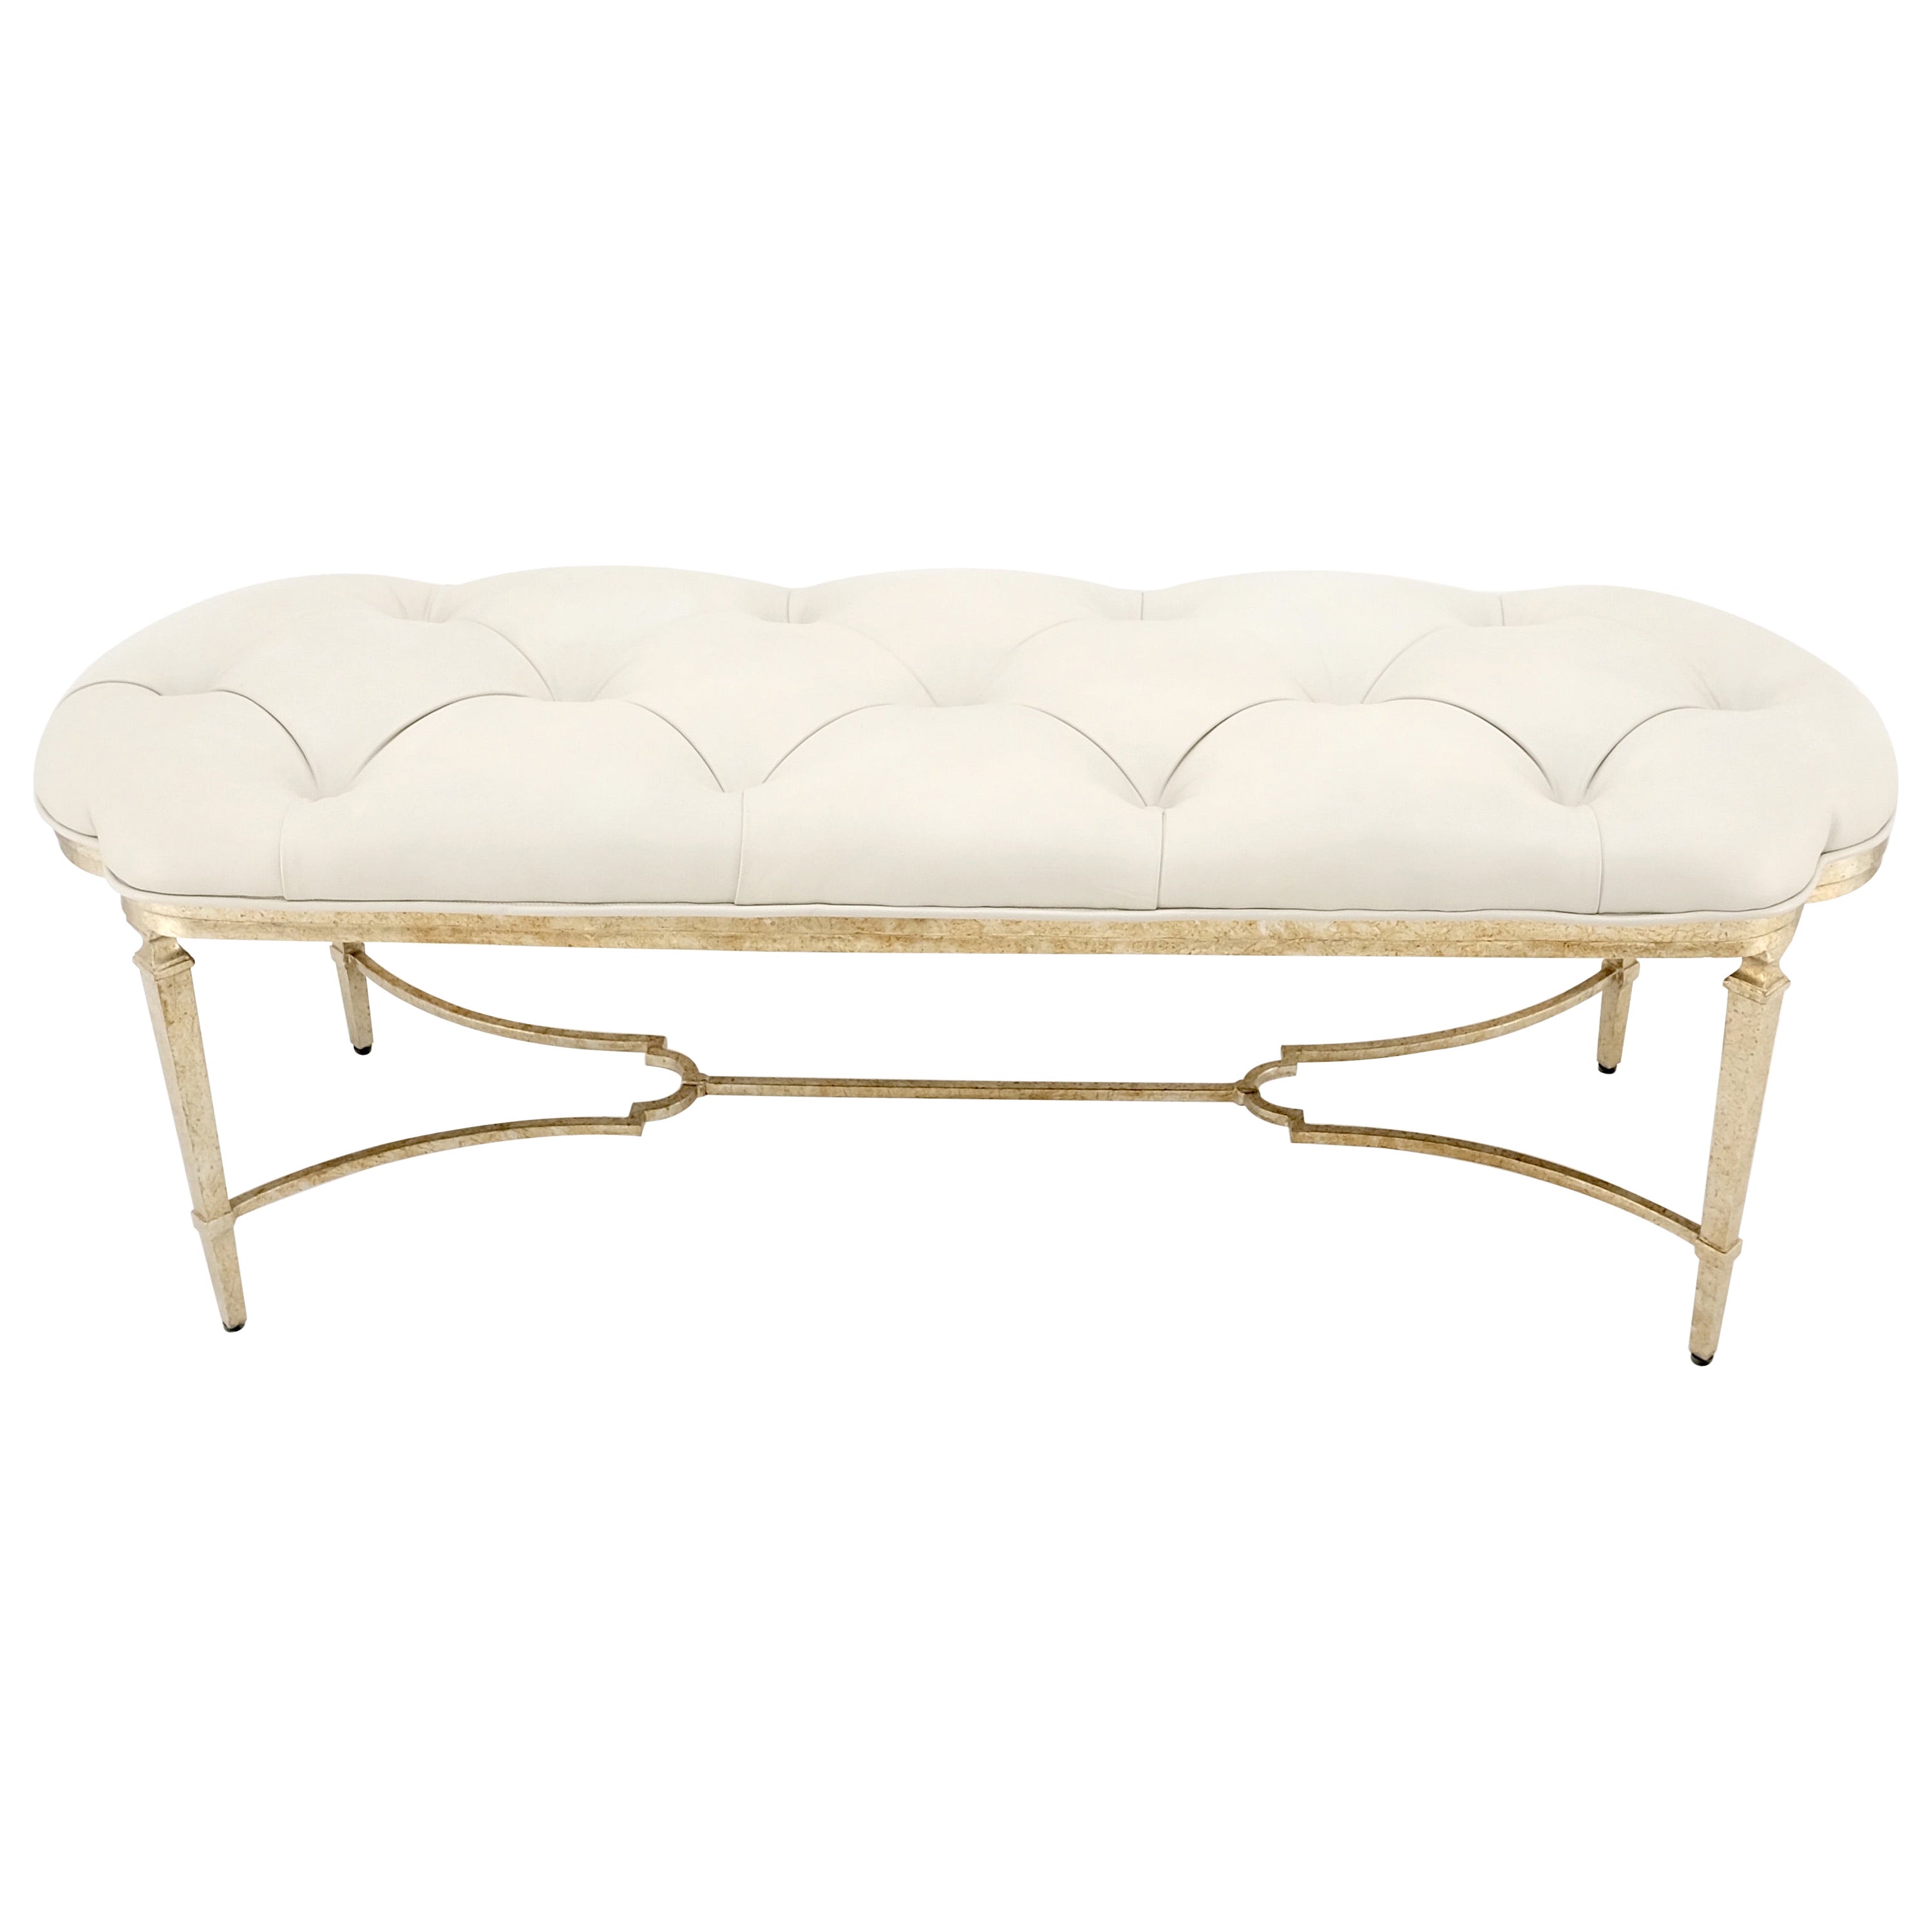 Gilt Wrought Iron Base Beige Tufted Leather Upholstery Window Hall Bench MINT For Sale